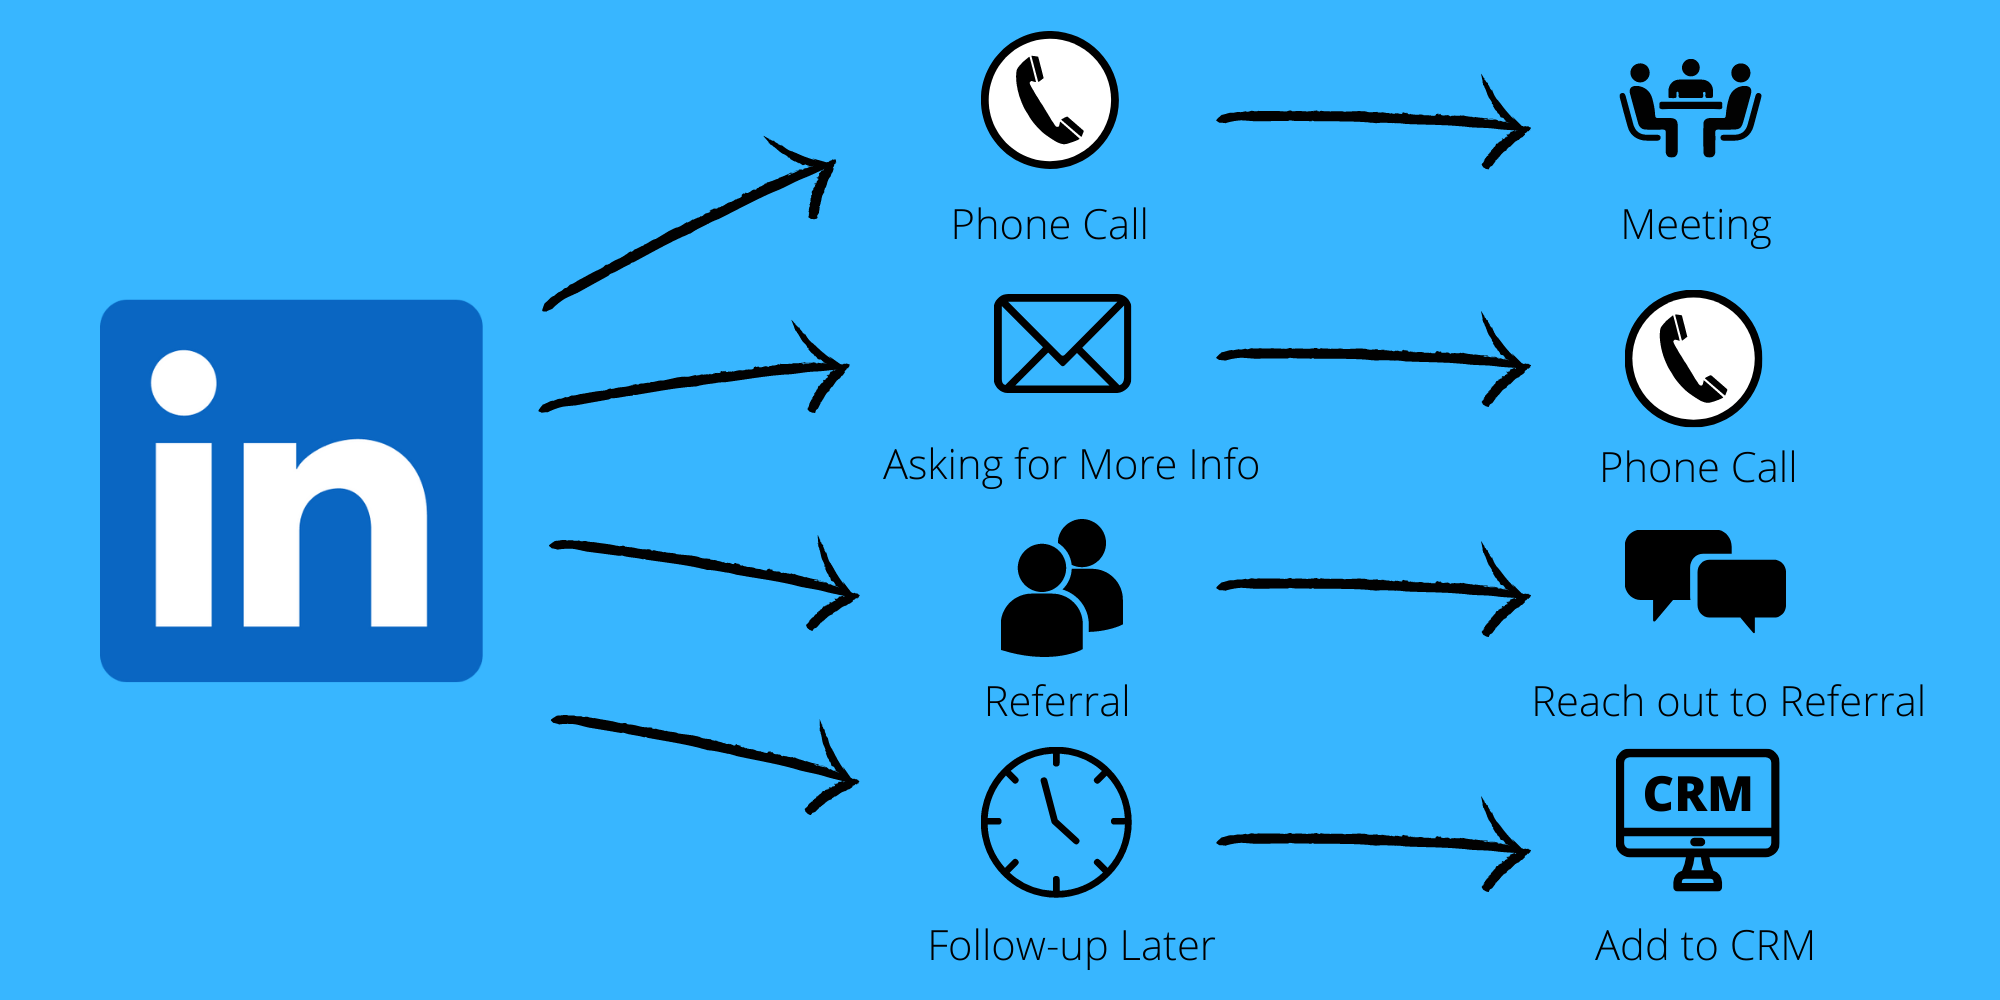 leads are requests for a phone call, more info, a referral, or a follow up